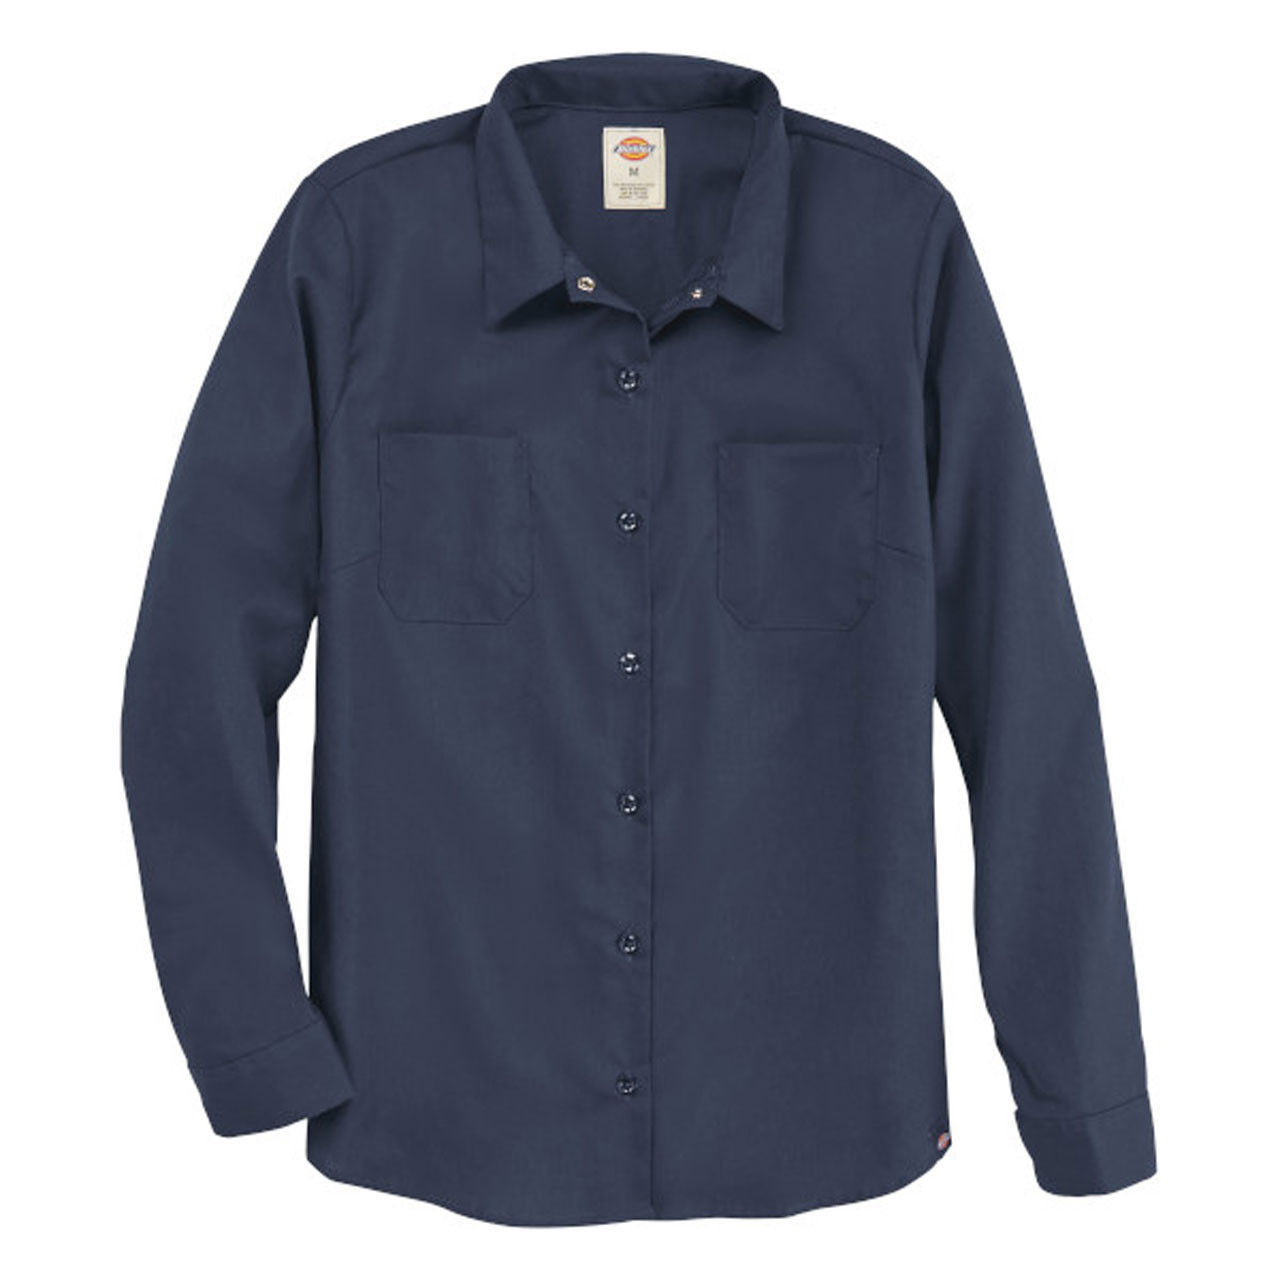 Does the Dickie long sleeve shirt resist fading?